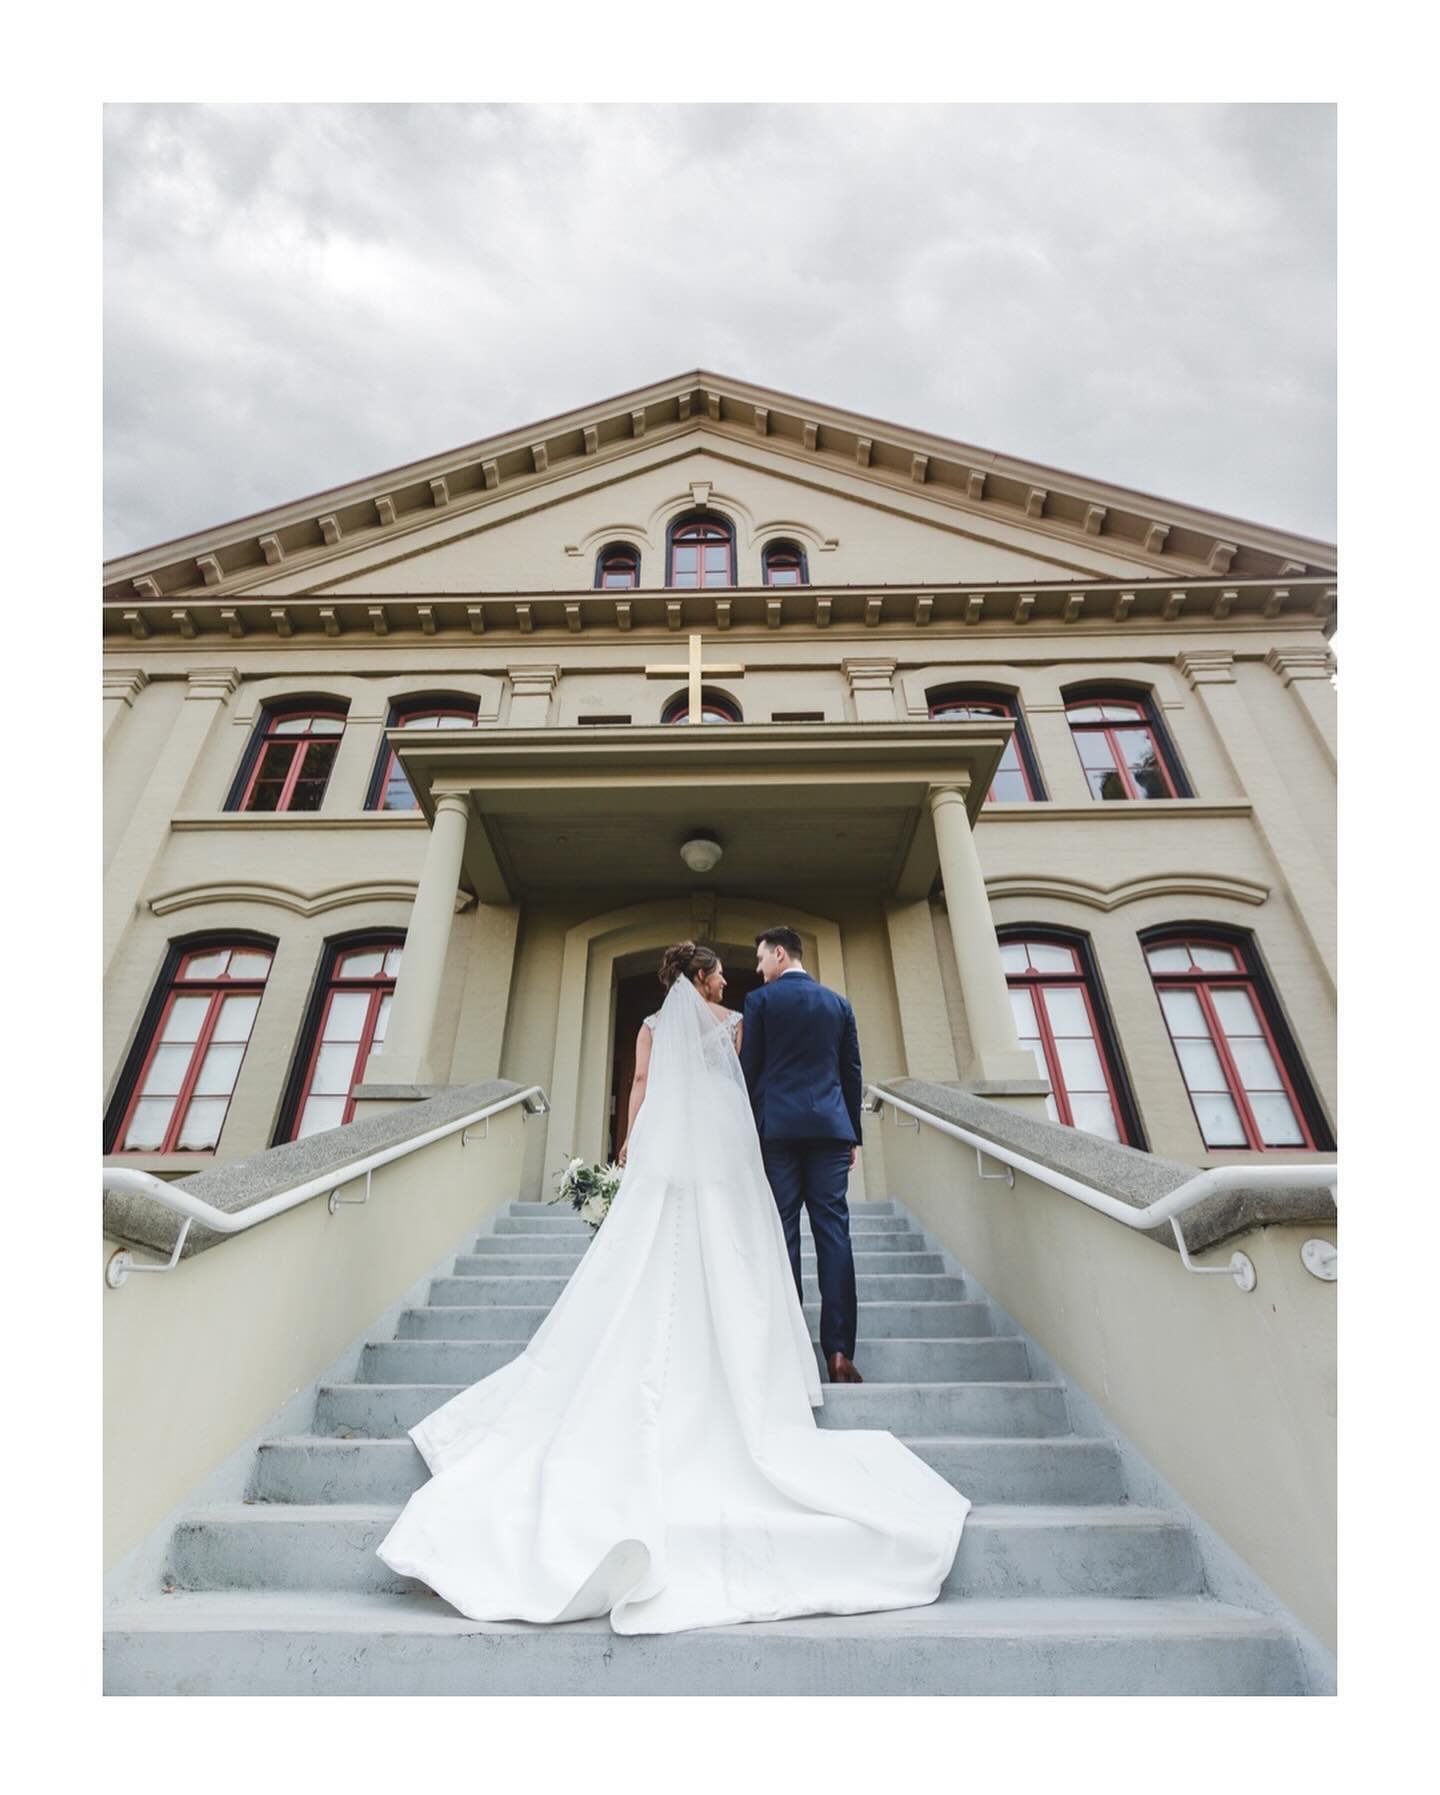 Michelle and Anthony at Saint Annes. A beautiful wedding for an equally beautiful couple.Officiant  @vancouverislandweddinglady  Wedding Organizer @beautybrideweddings 
*
*
#Gulfislandweddings #vancouvercouple #weddingsvancouver #vancouverengagementp